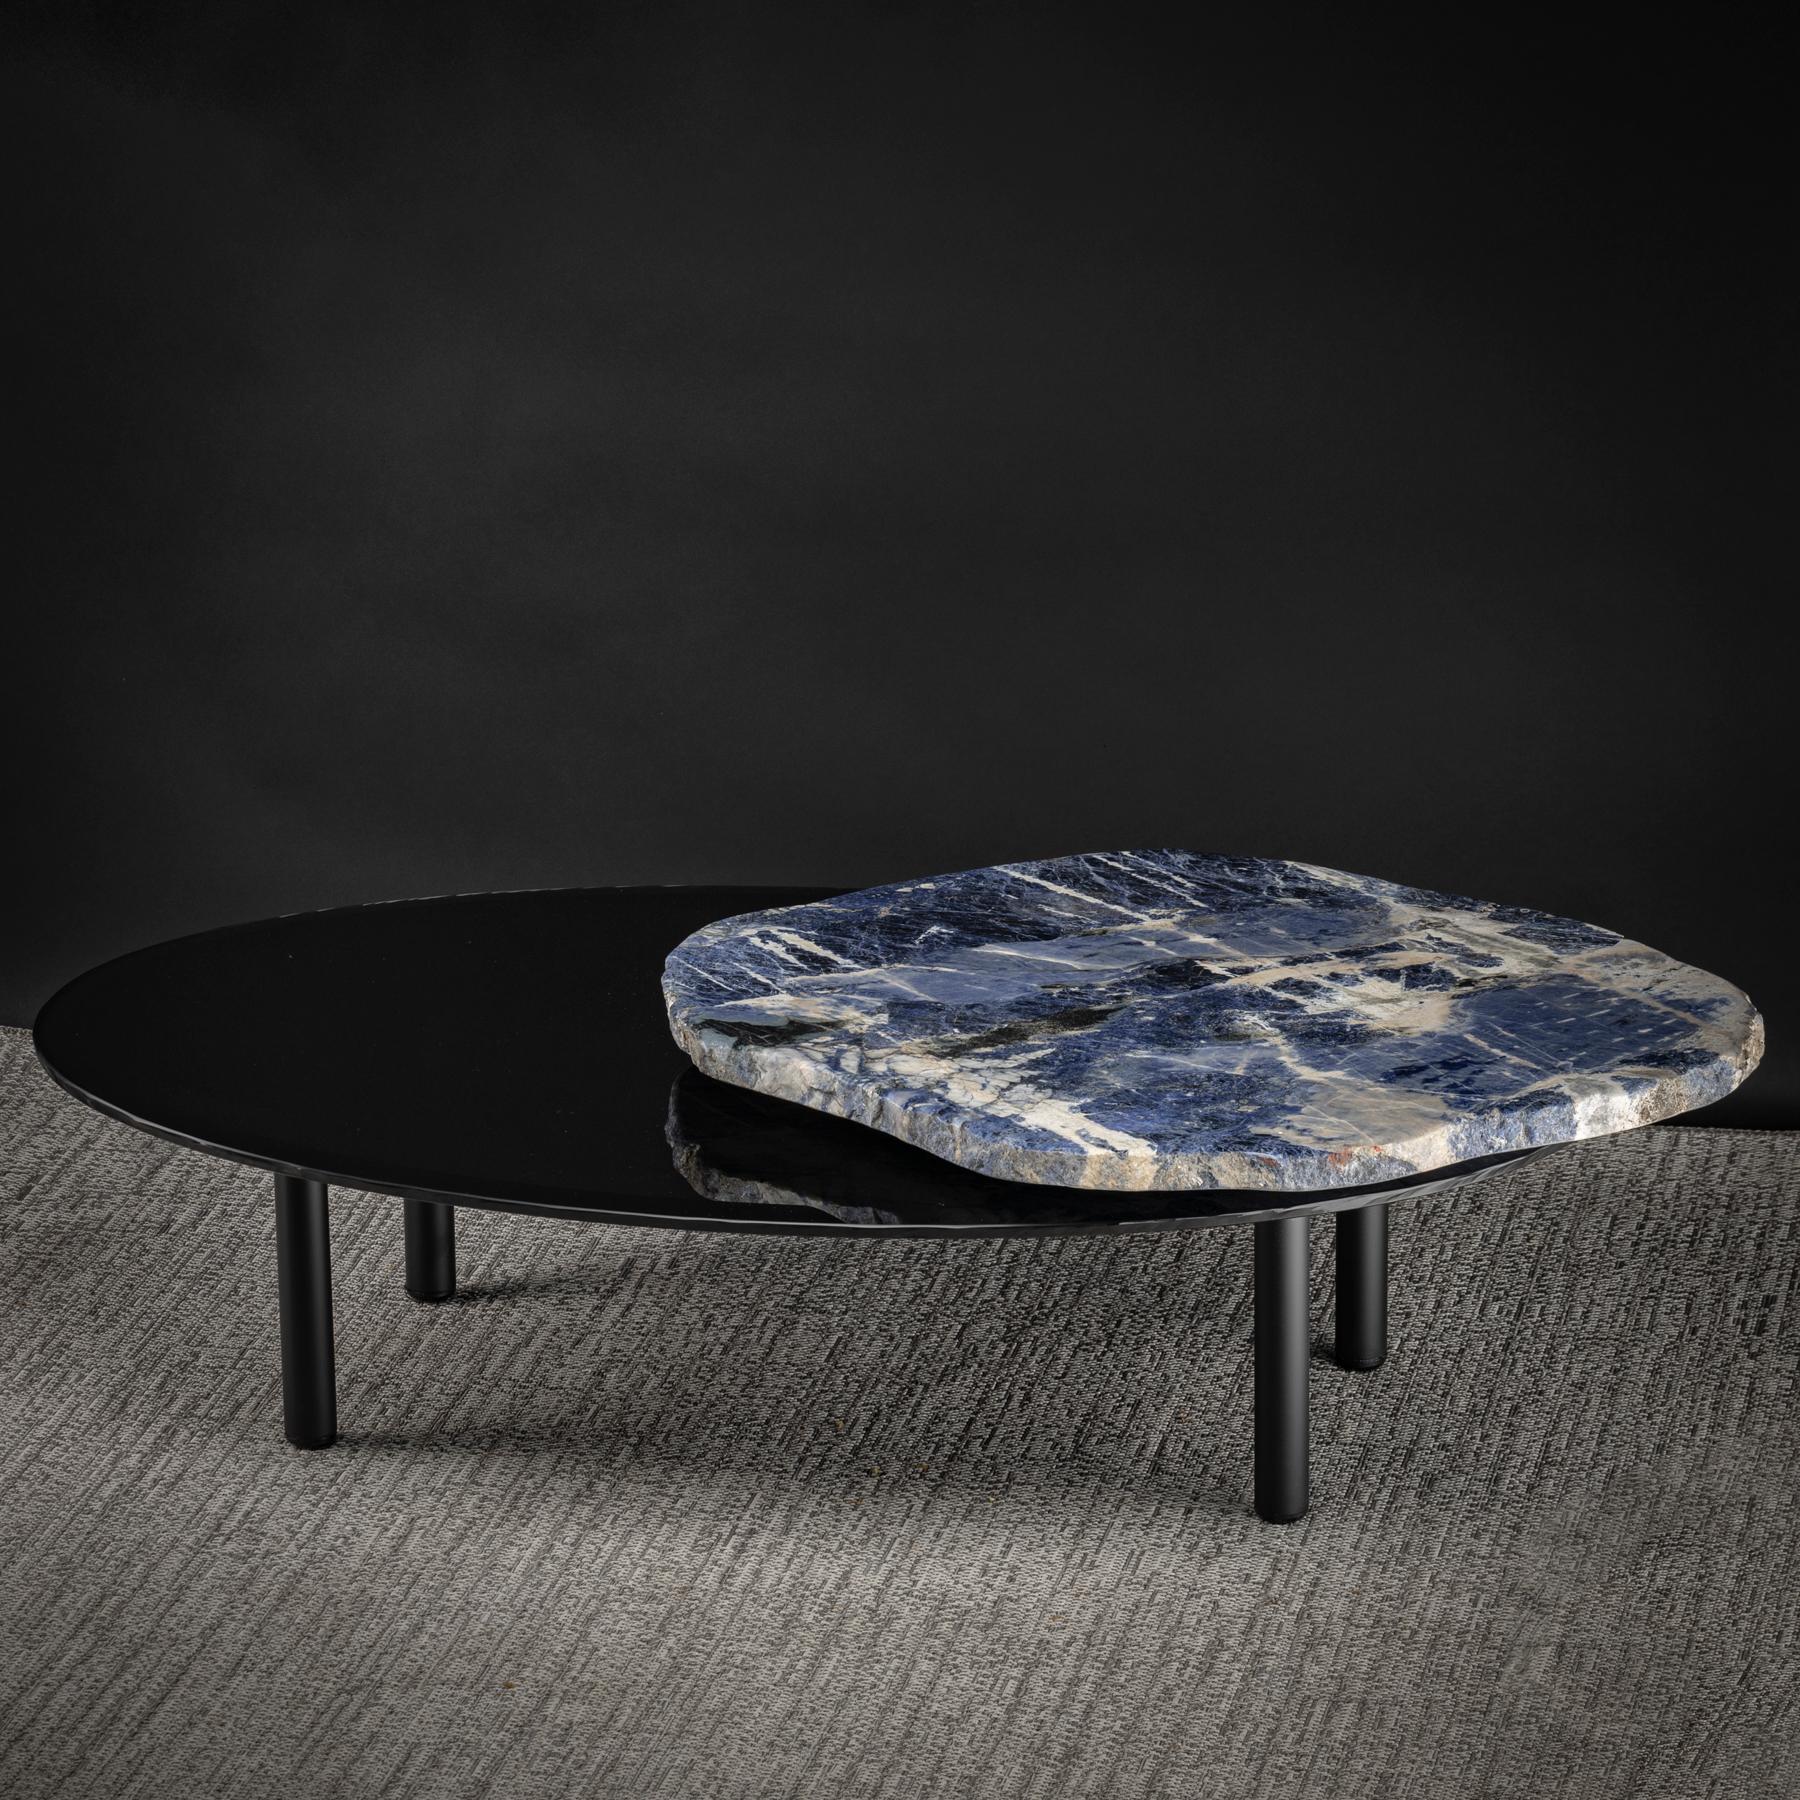 Center Table, with Rotating Brazilian Sodalite Slab on Black Tempered Glass 2